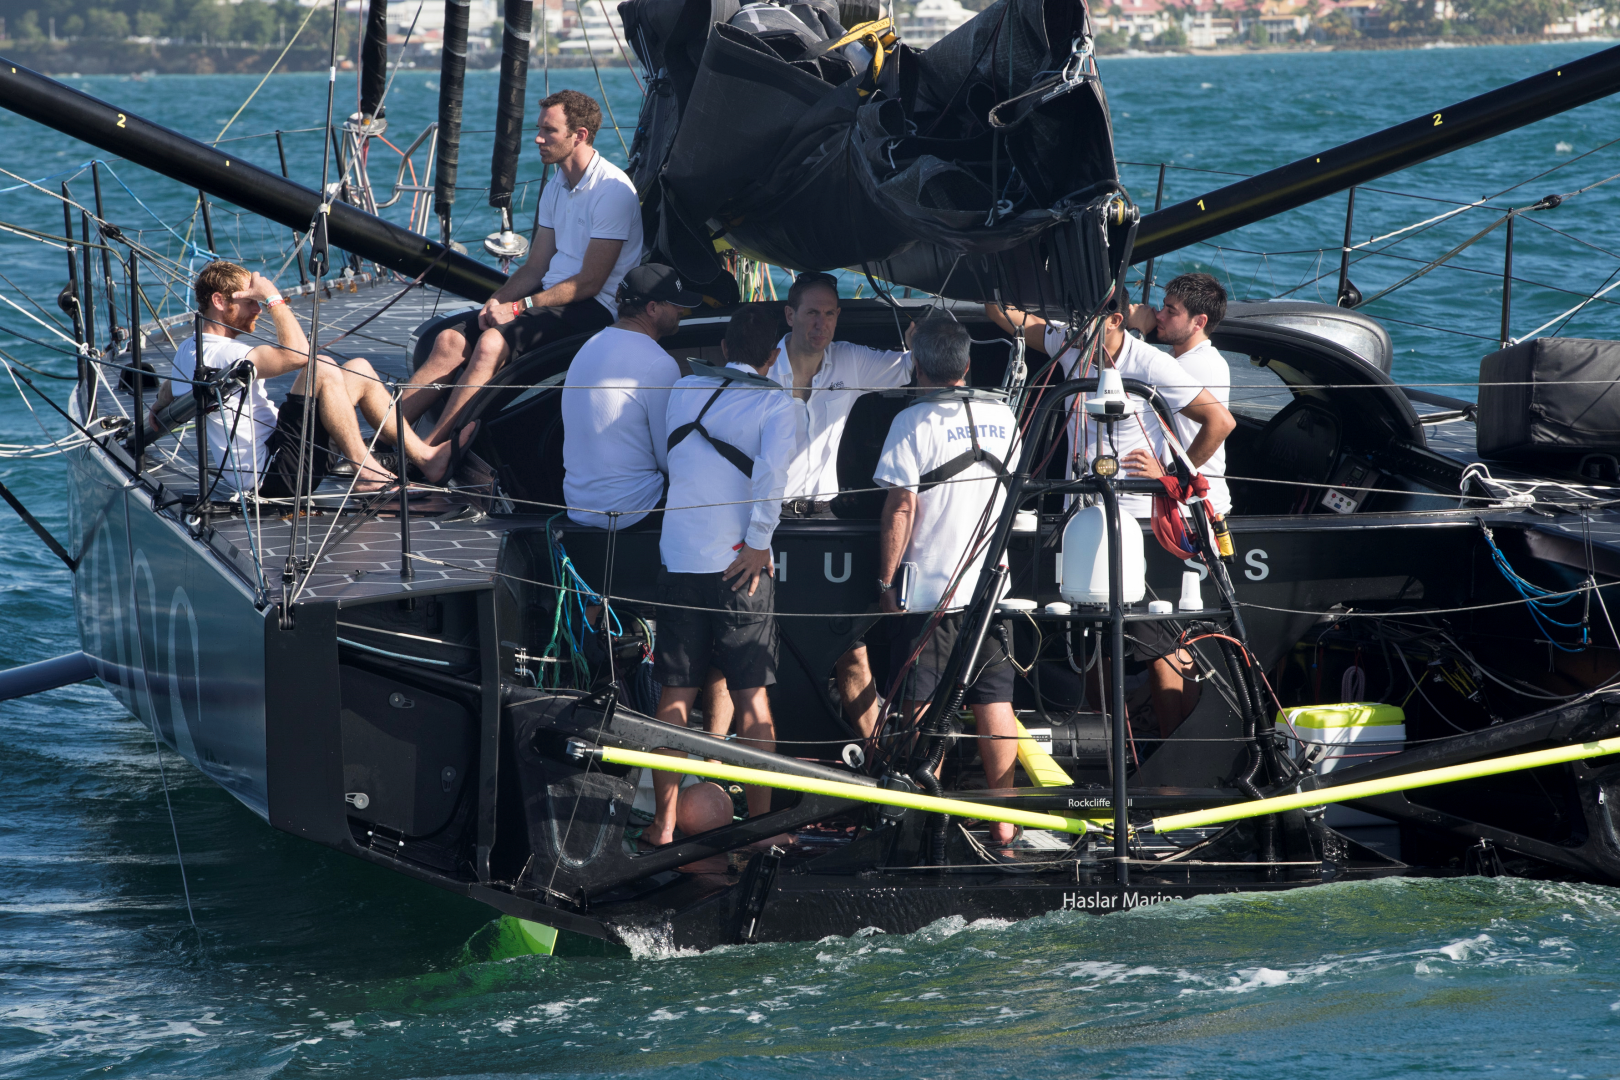 The jury joined Thomson on board to hand him his penalty (Image credit: Alexis Courcoux)